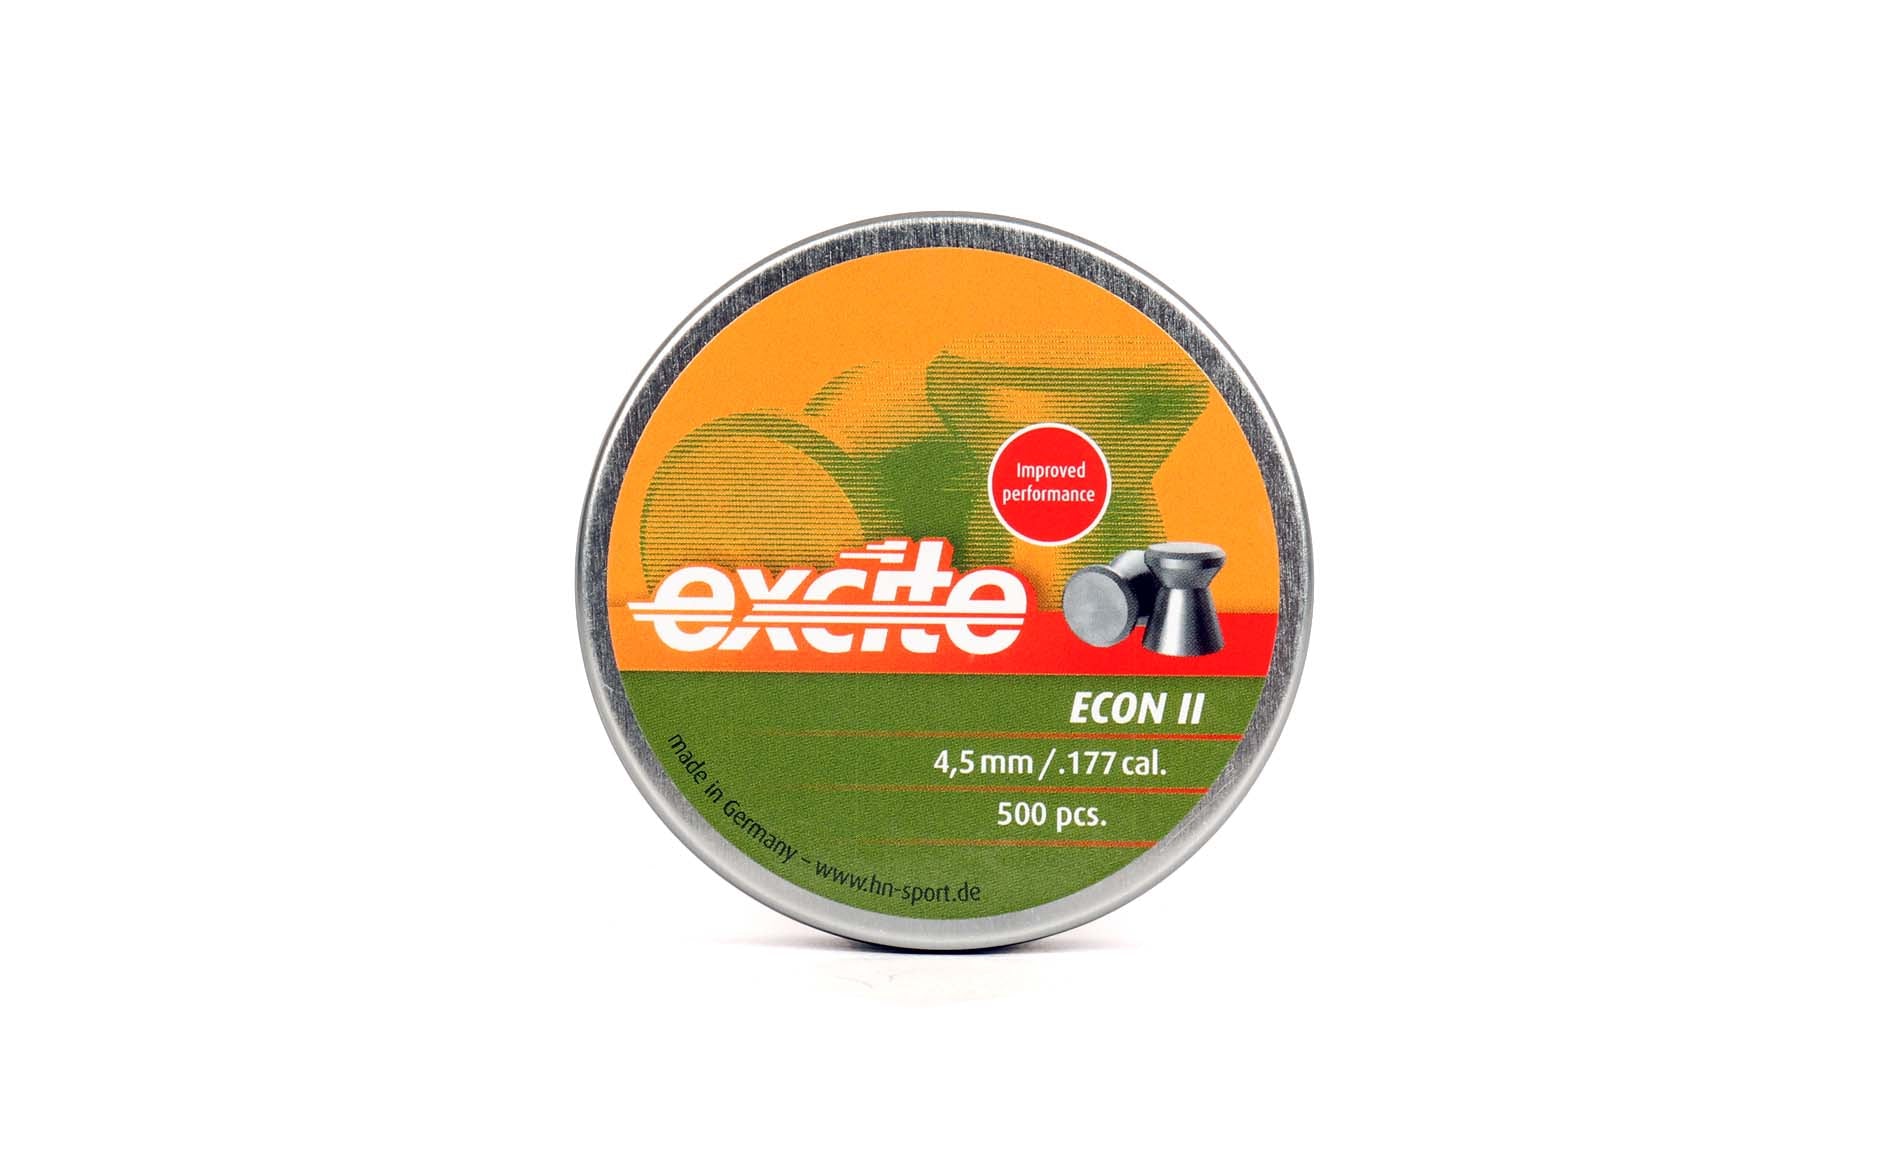 H&N Sports Excite Econ II 0.177cal